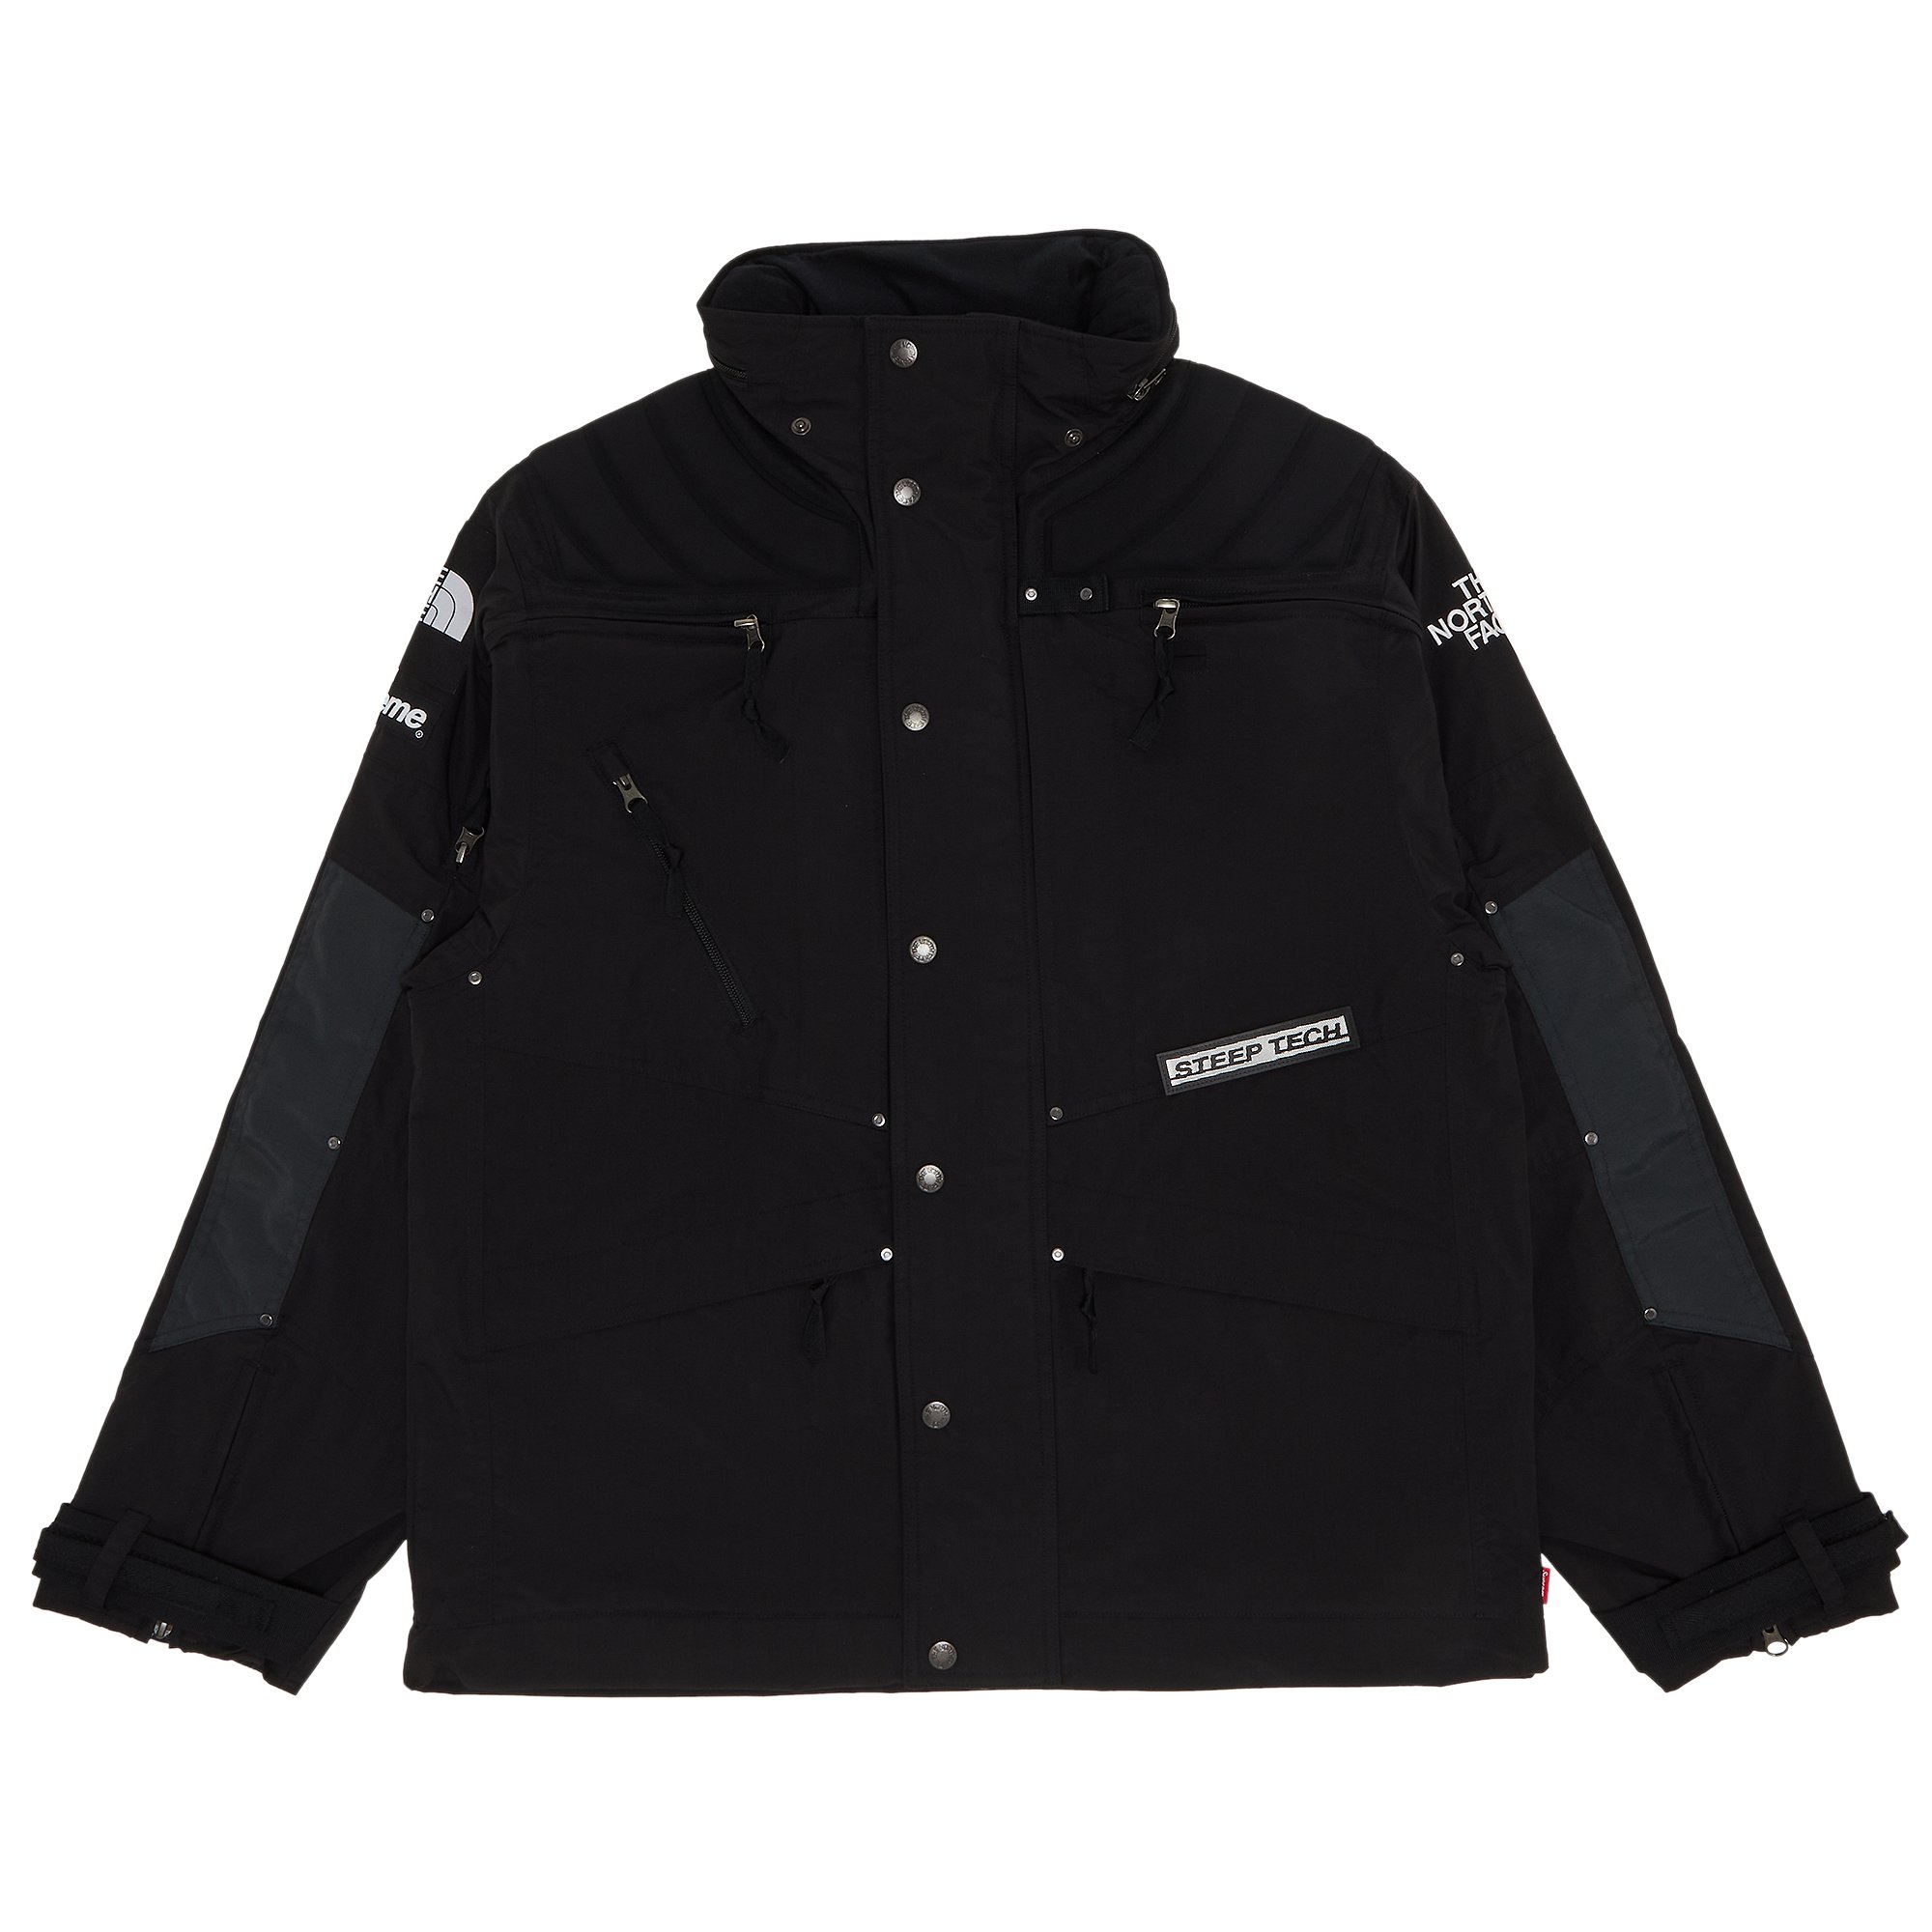 Buy Supreme x The North Face Steep Tech Apogee Jacket 'Black